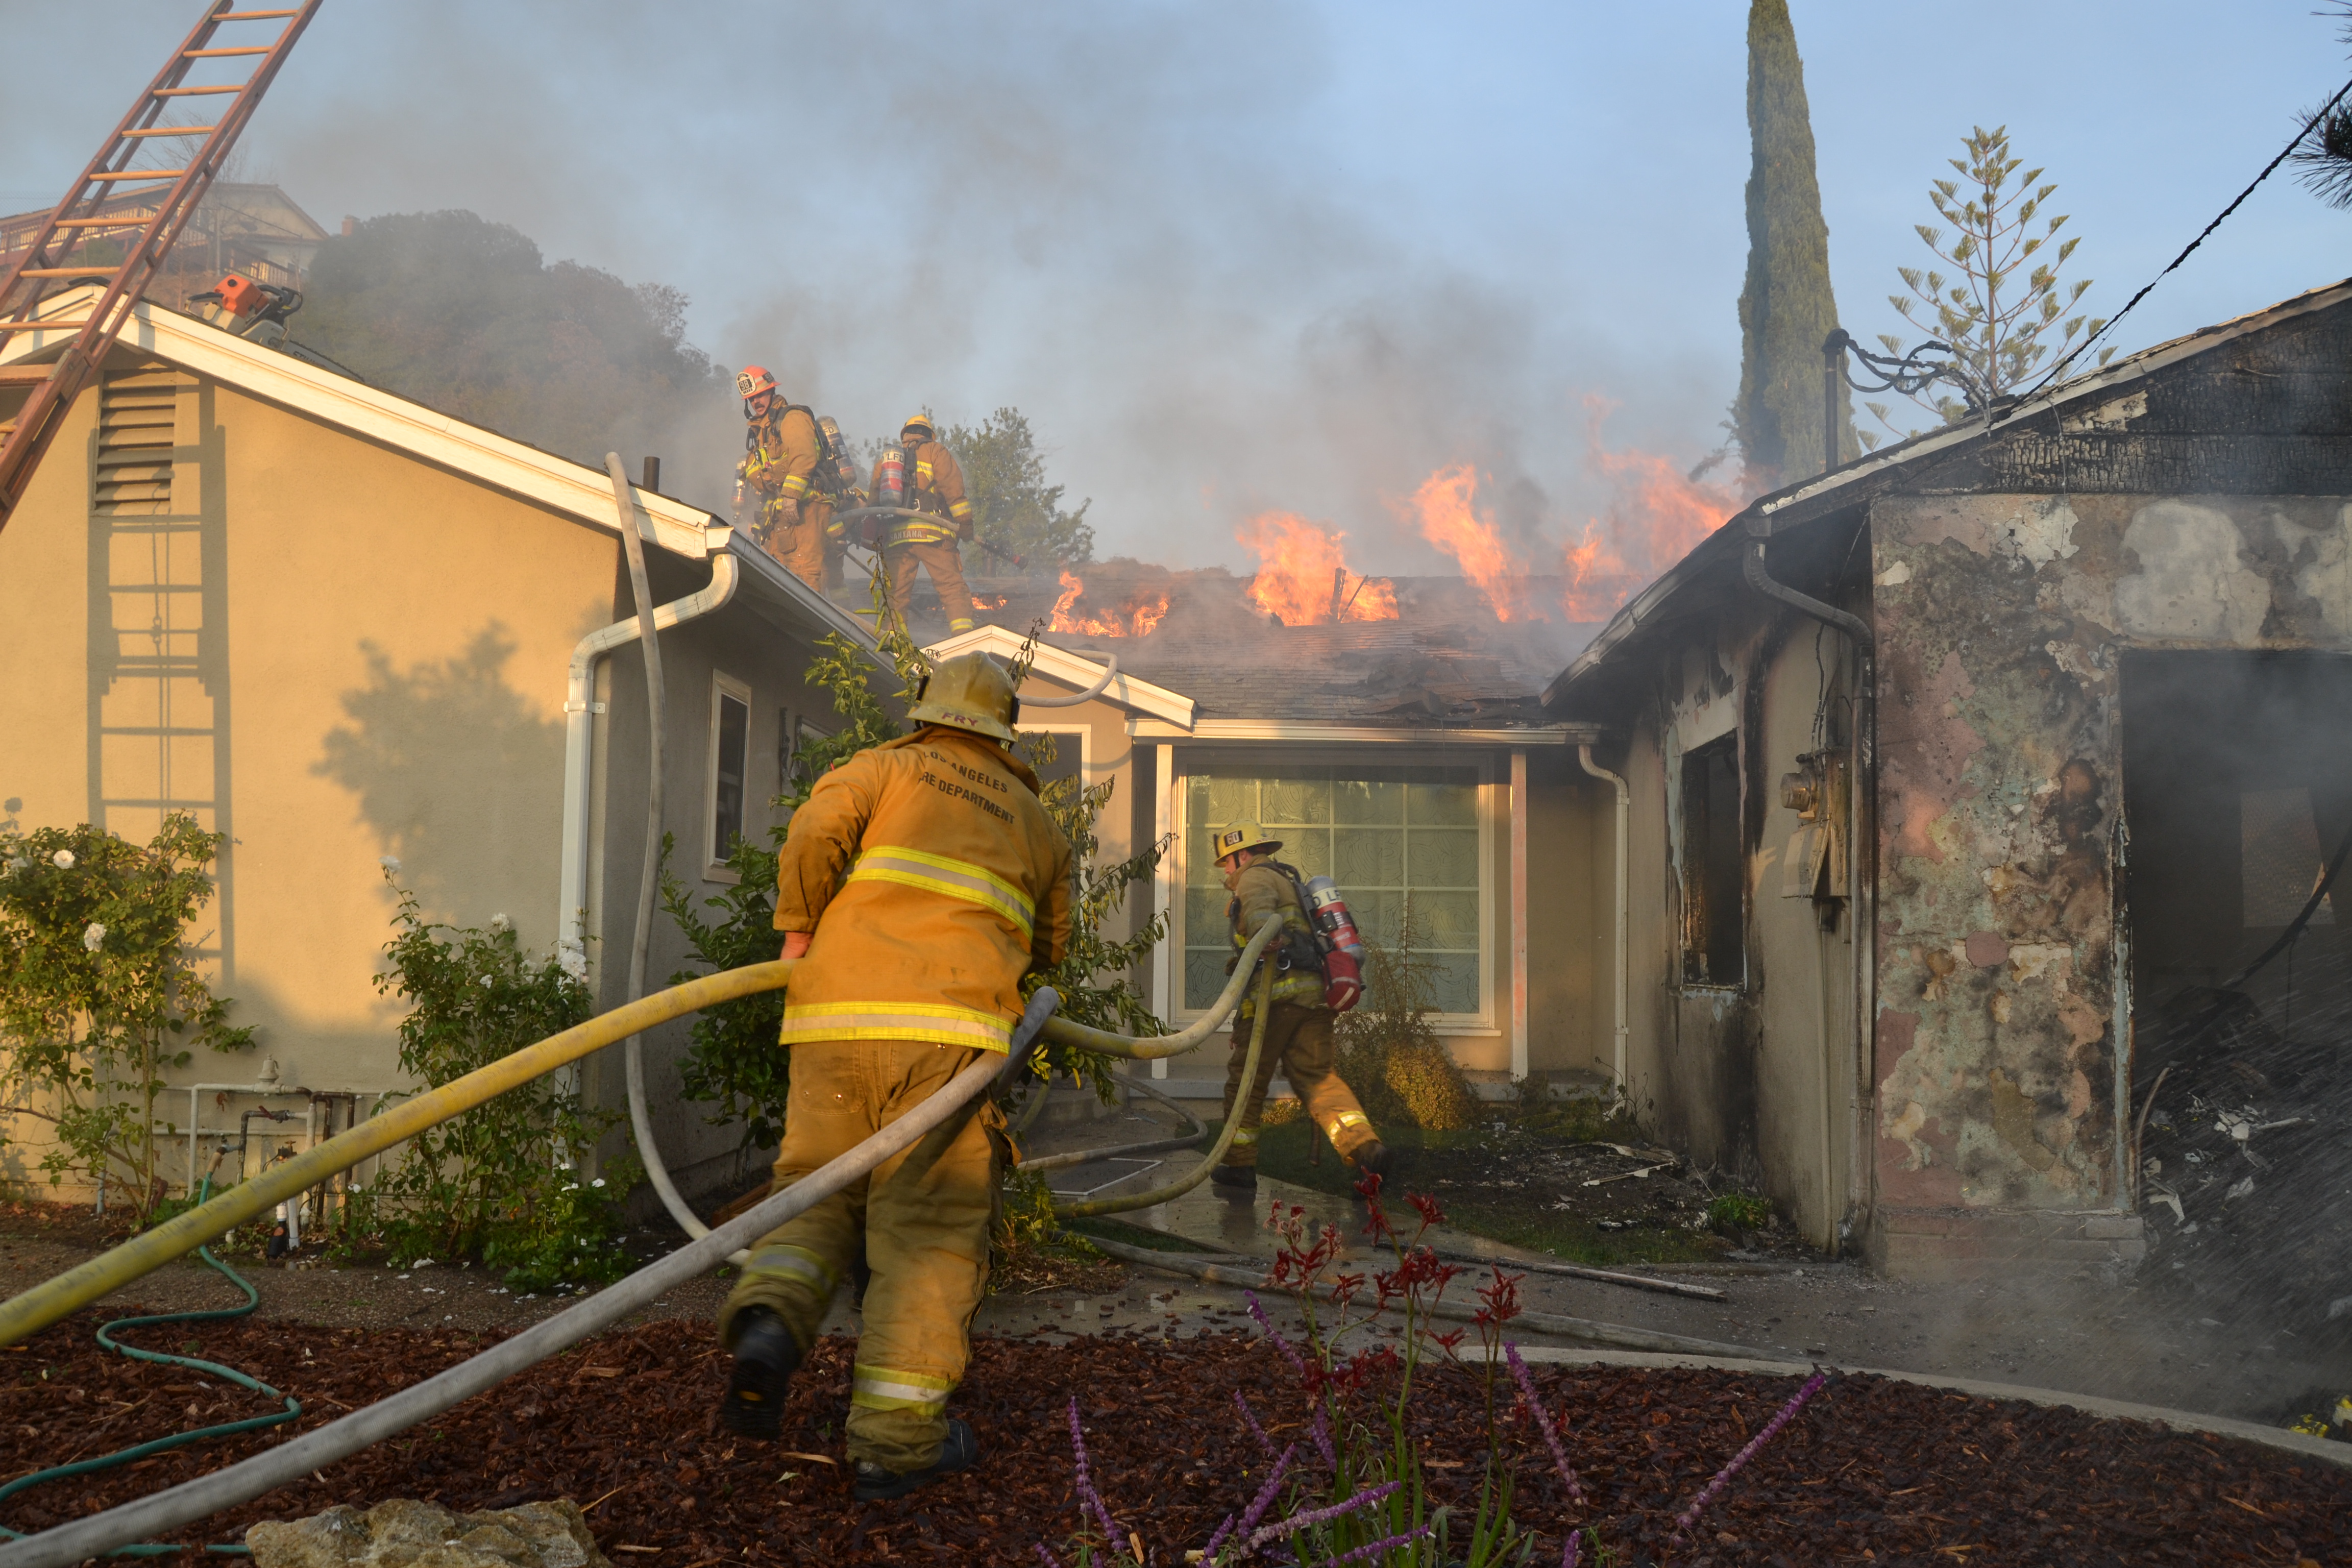 Firefighters Advance Hoselines on Burning Home in Sun Valley